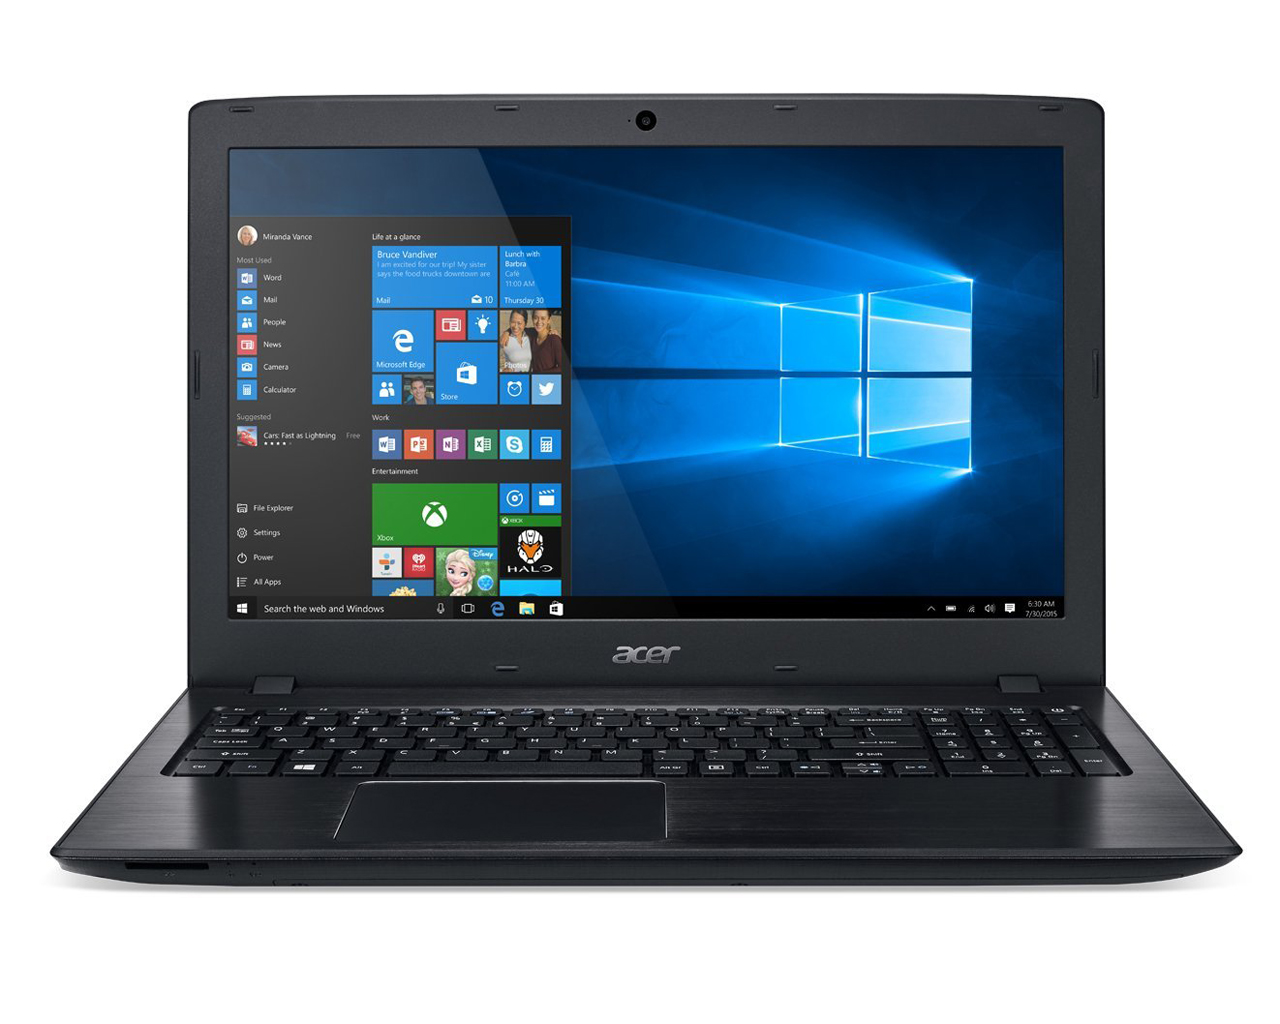 Acer Aspire E 15 (E5-576G-5762) review: A cheap laptop with all